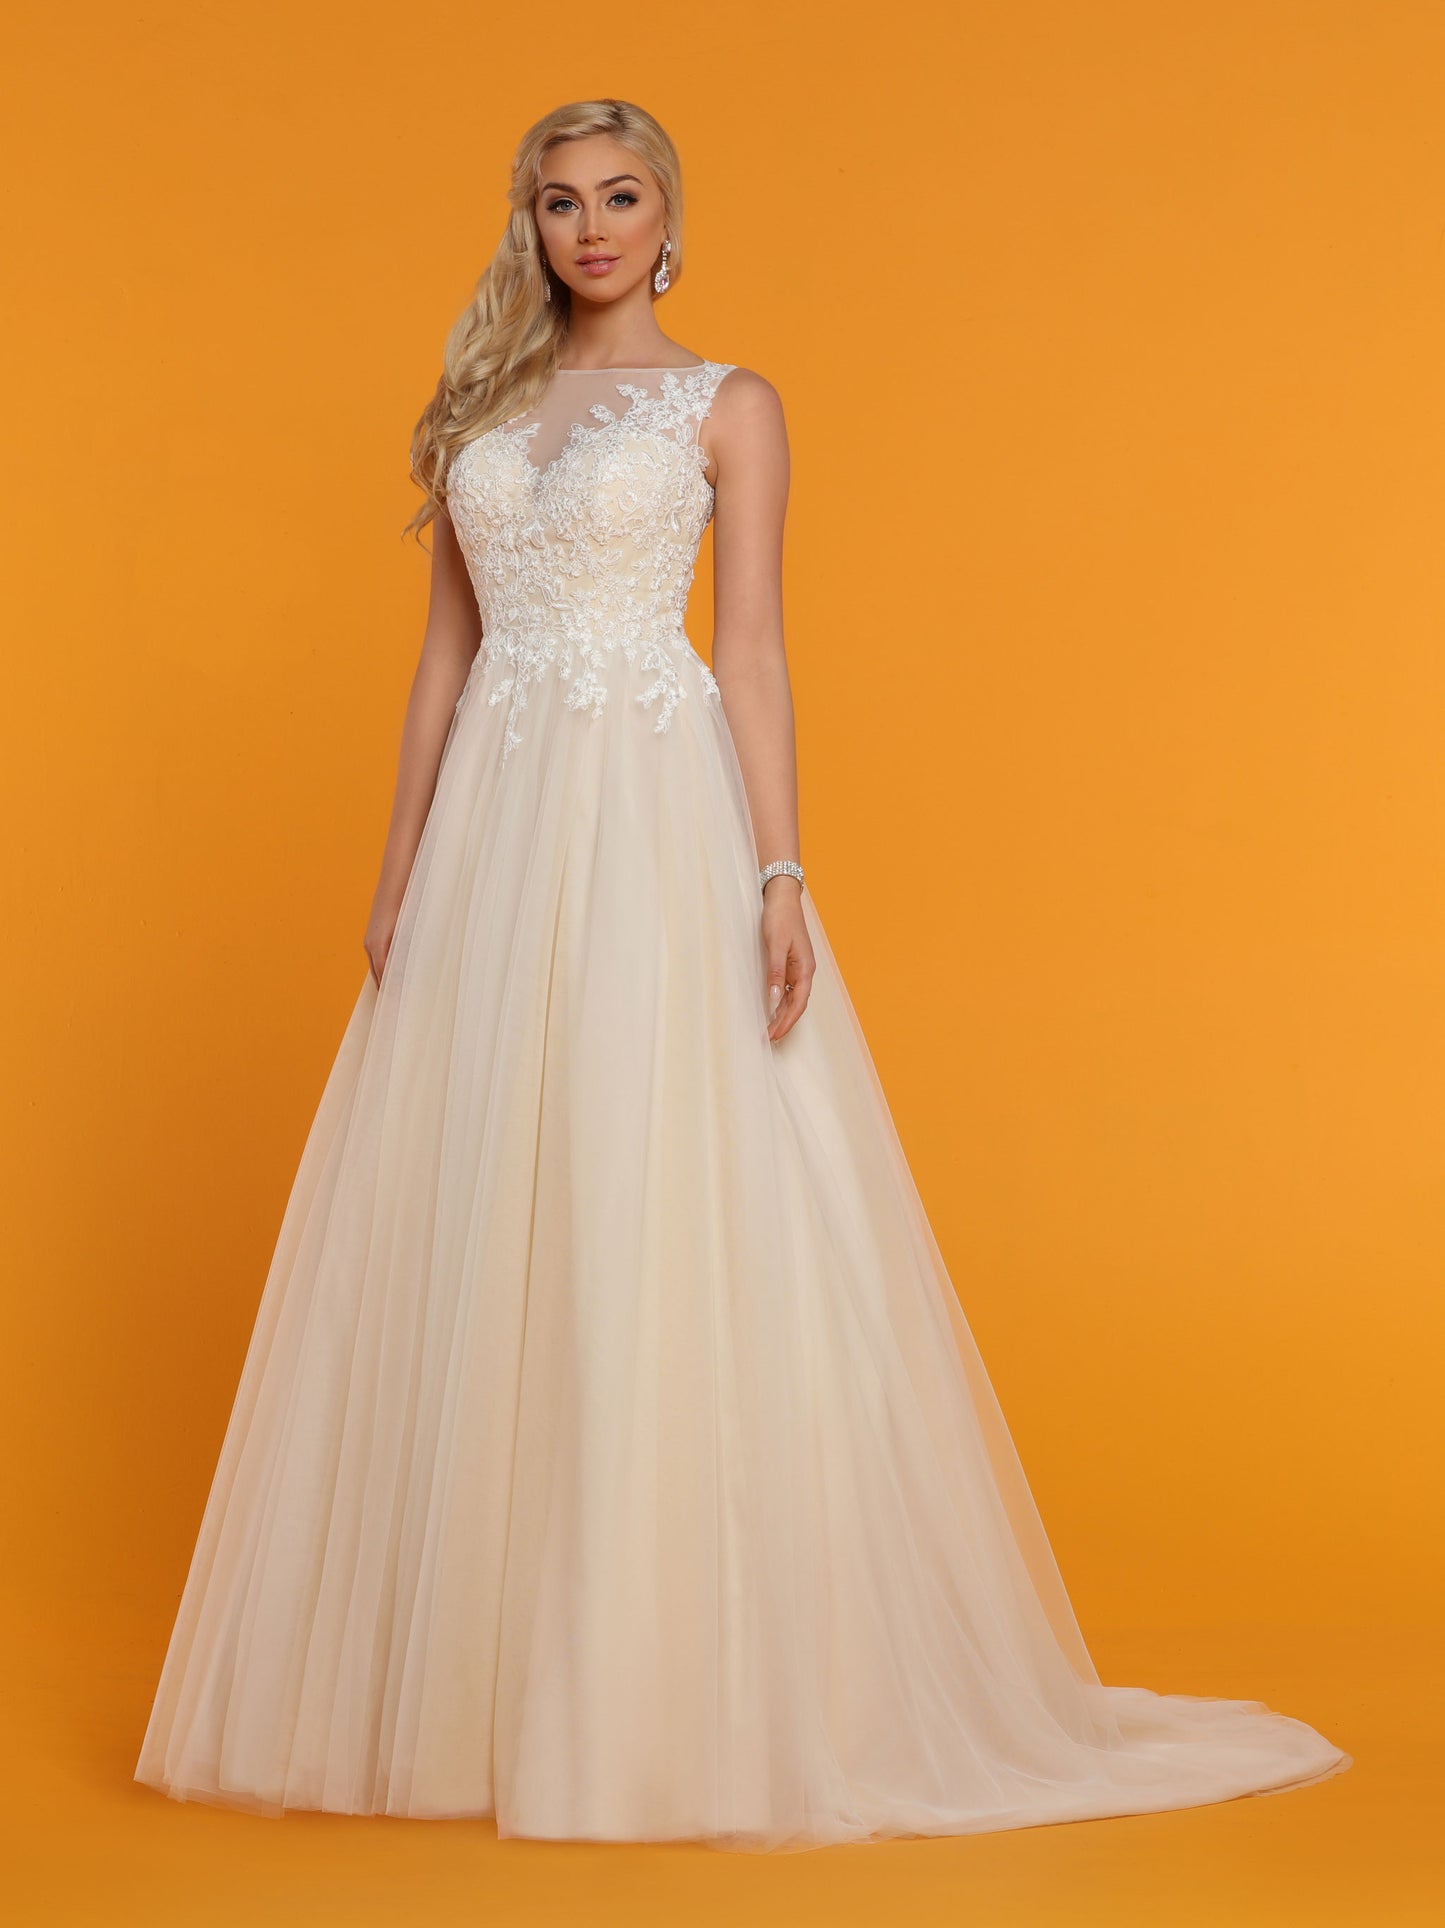 Davinci Bridal 50515 is a Tulle ballgown Wedding Dress. Featuring a sheer illusion lace high neckline and back. Buttons along the back seam. Lace cascades from bodice down into the lush tulle Ballgown skirt.  Available for 1-2 Week Delivery!!!  Available Sizes: 2,4,6,8,10,12,14,16,18,20  Available Colors: Ivory/Nude, Ivory/Ivory